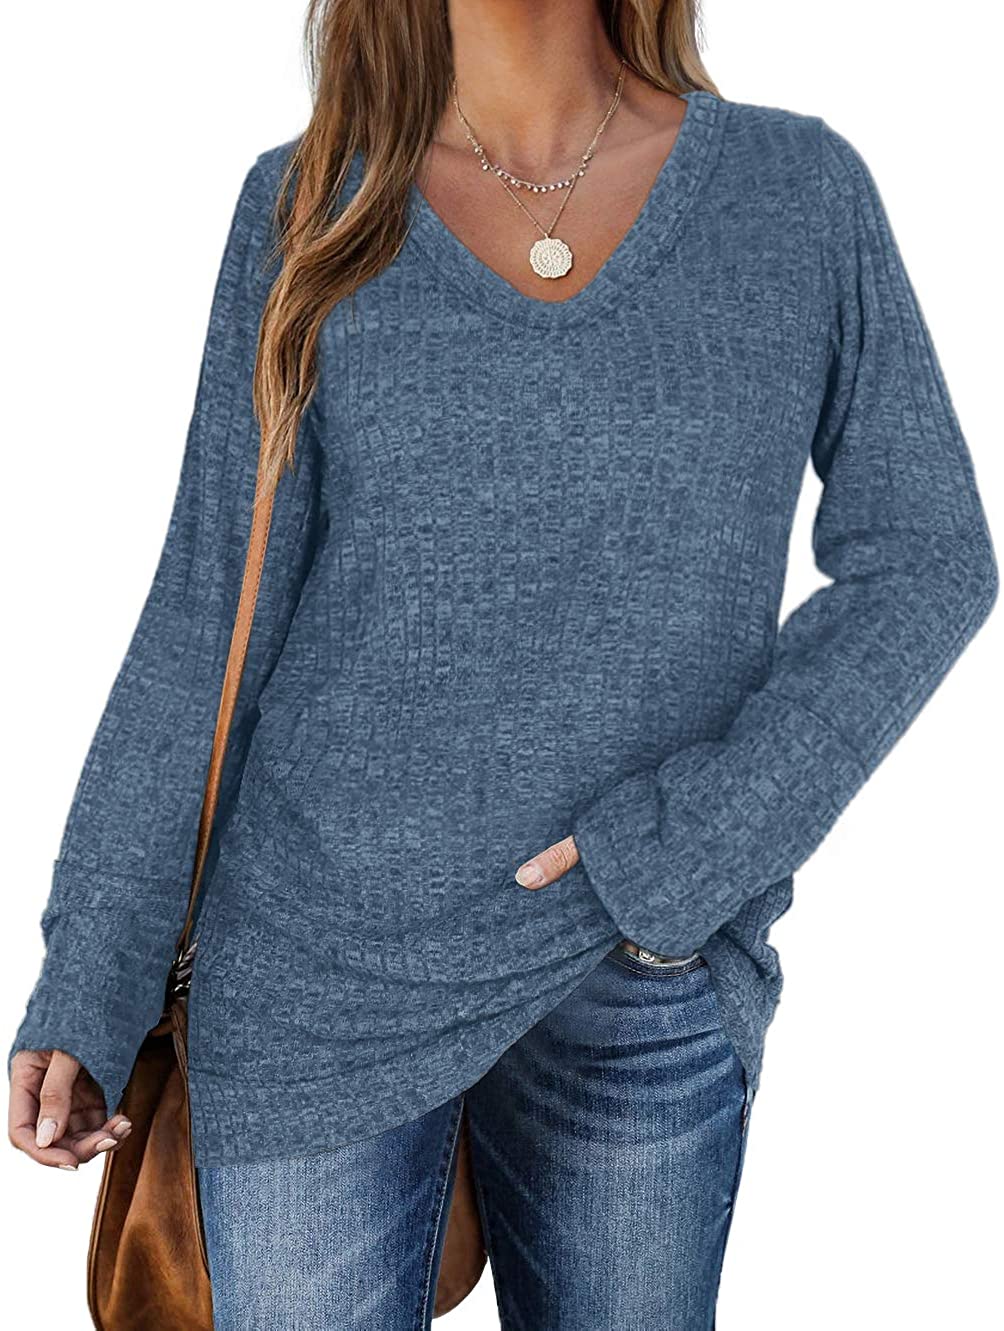 WIHOLL Sweaters for Women Long Sleeve V Neck Solid Color Fashion Tops 